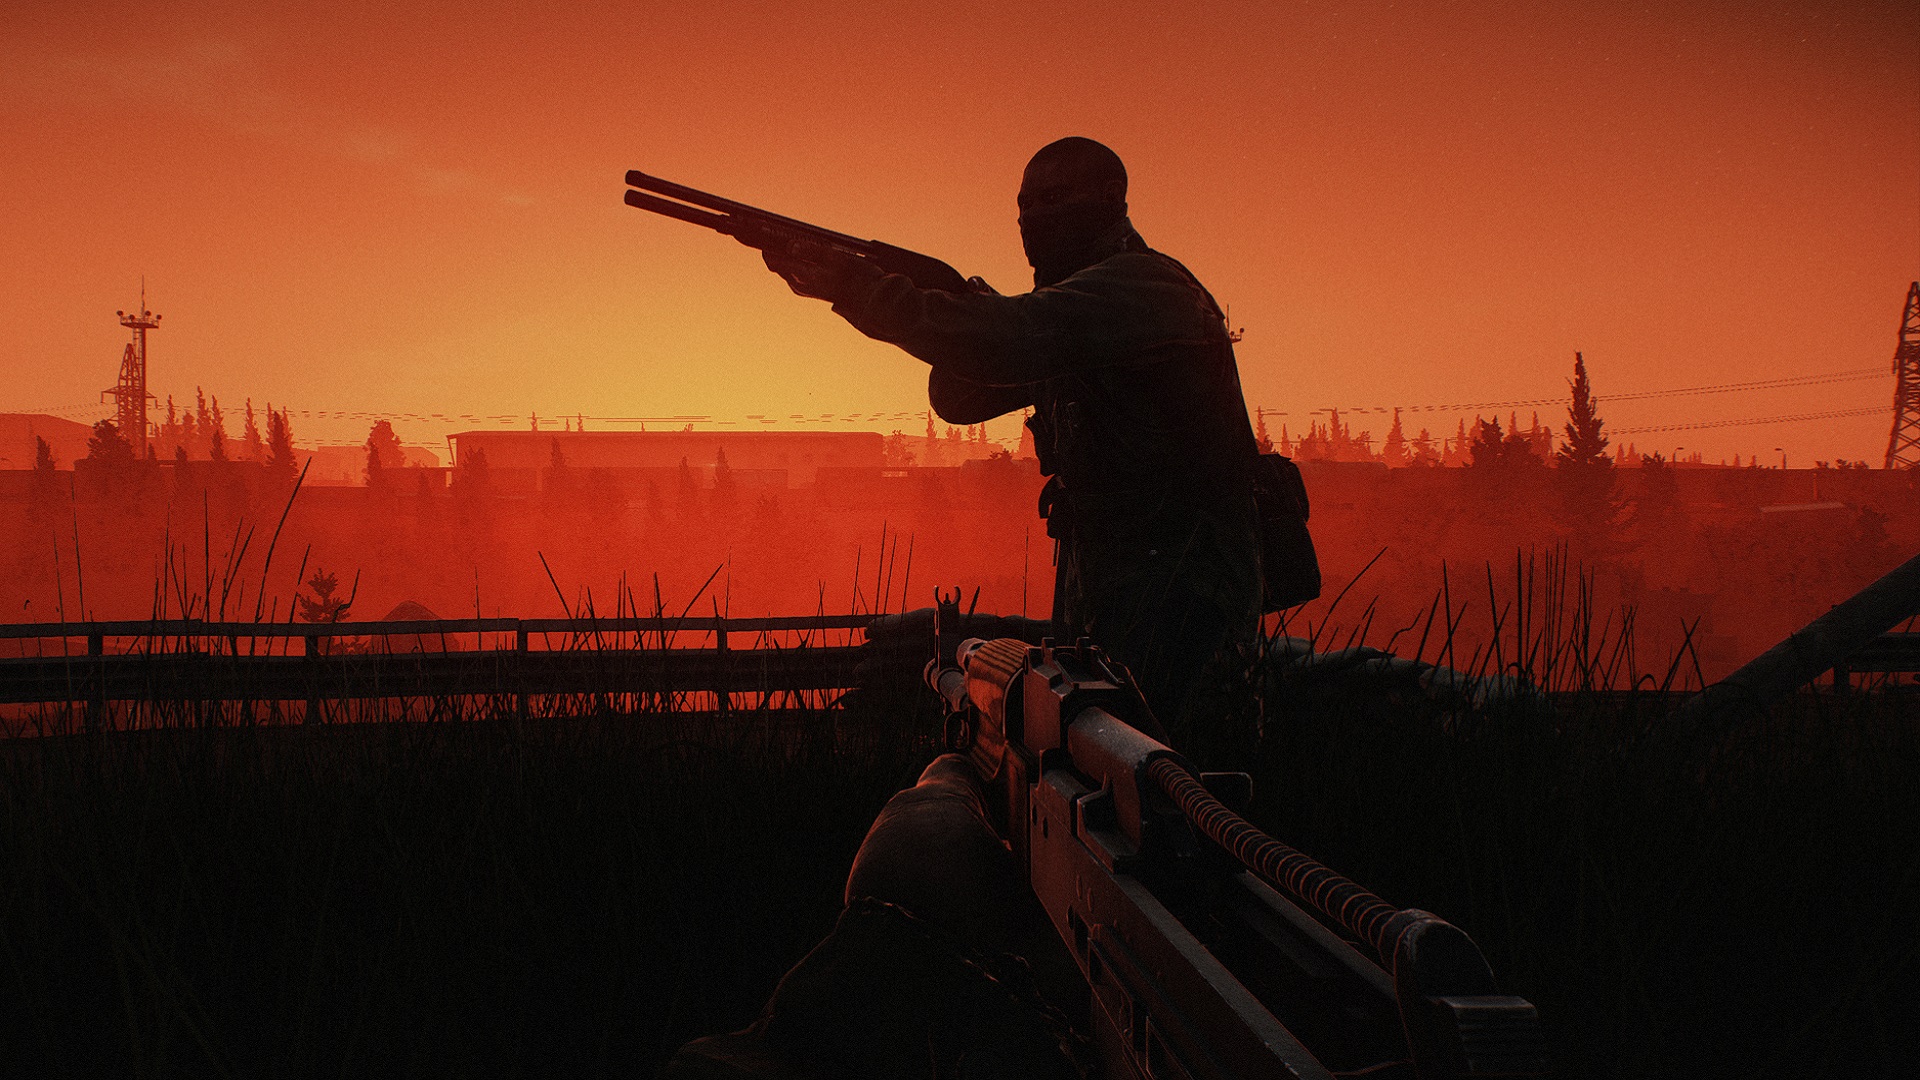 Don't buy Escape from Tarkov on Steam, it's a fake